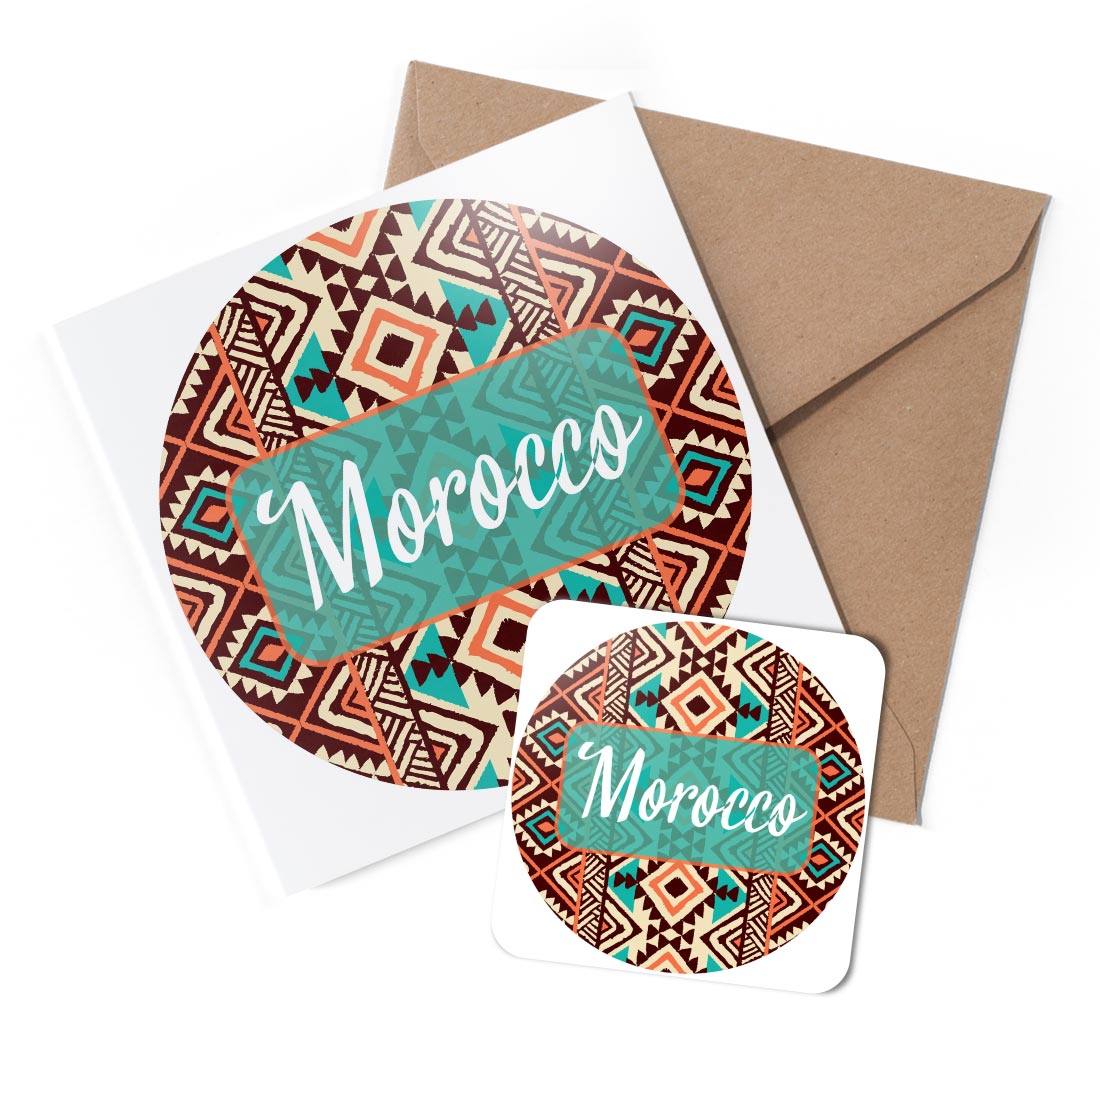 1 x Greeting Card & Coaster Set - Morocco Africa Traditional Ornament #60404